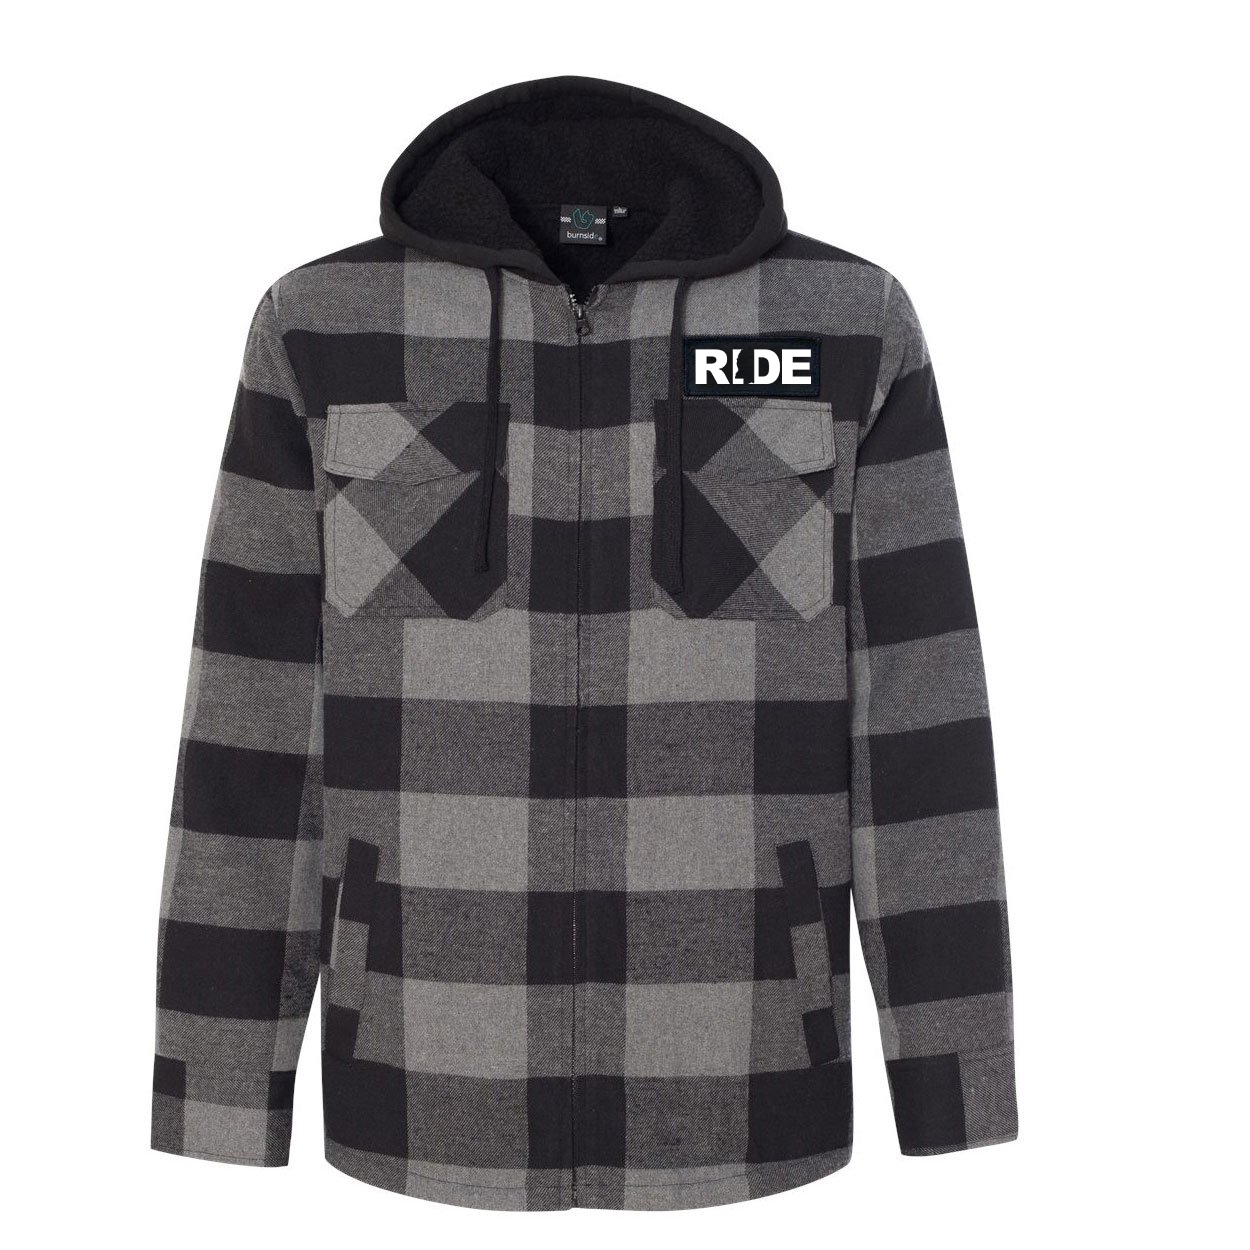 Ride Mississippi Classic Unisex Full Zip Woven Patch Hooded Flannel Jacket Black/Gray (White Logo)